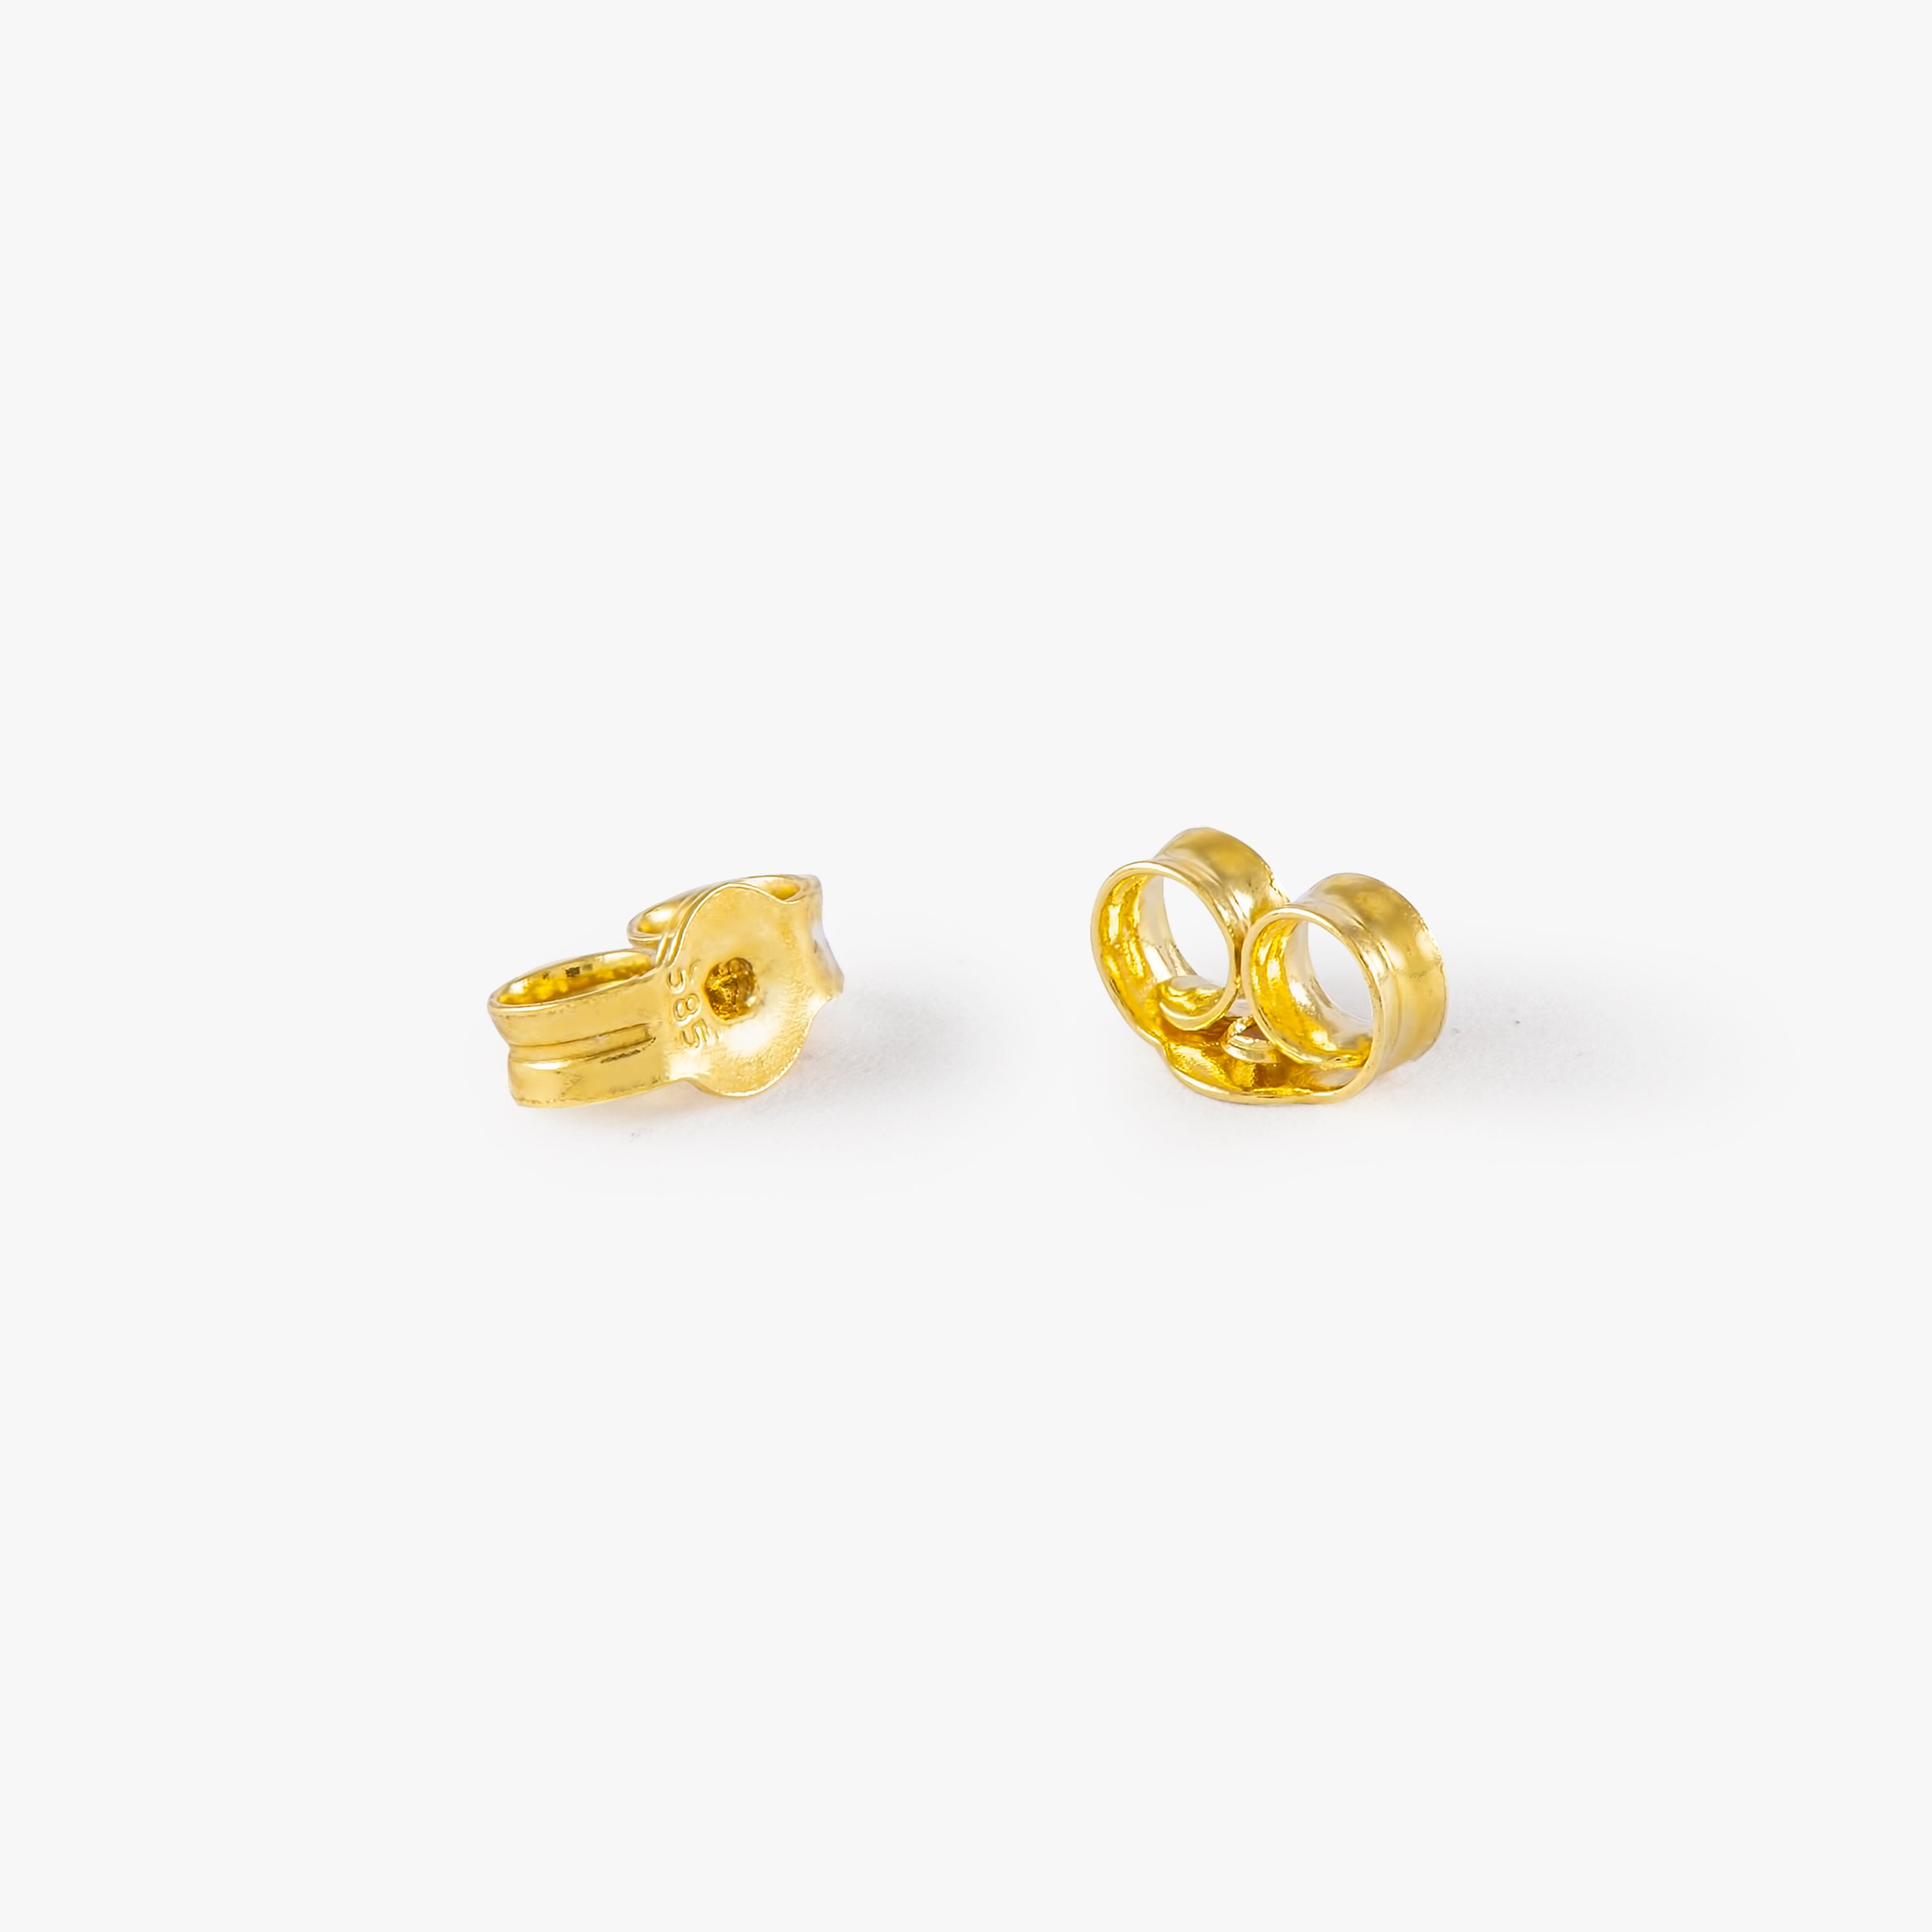 Marquise Emerald Stud Earrings Available in 14K and 18K Gold